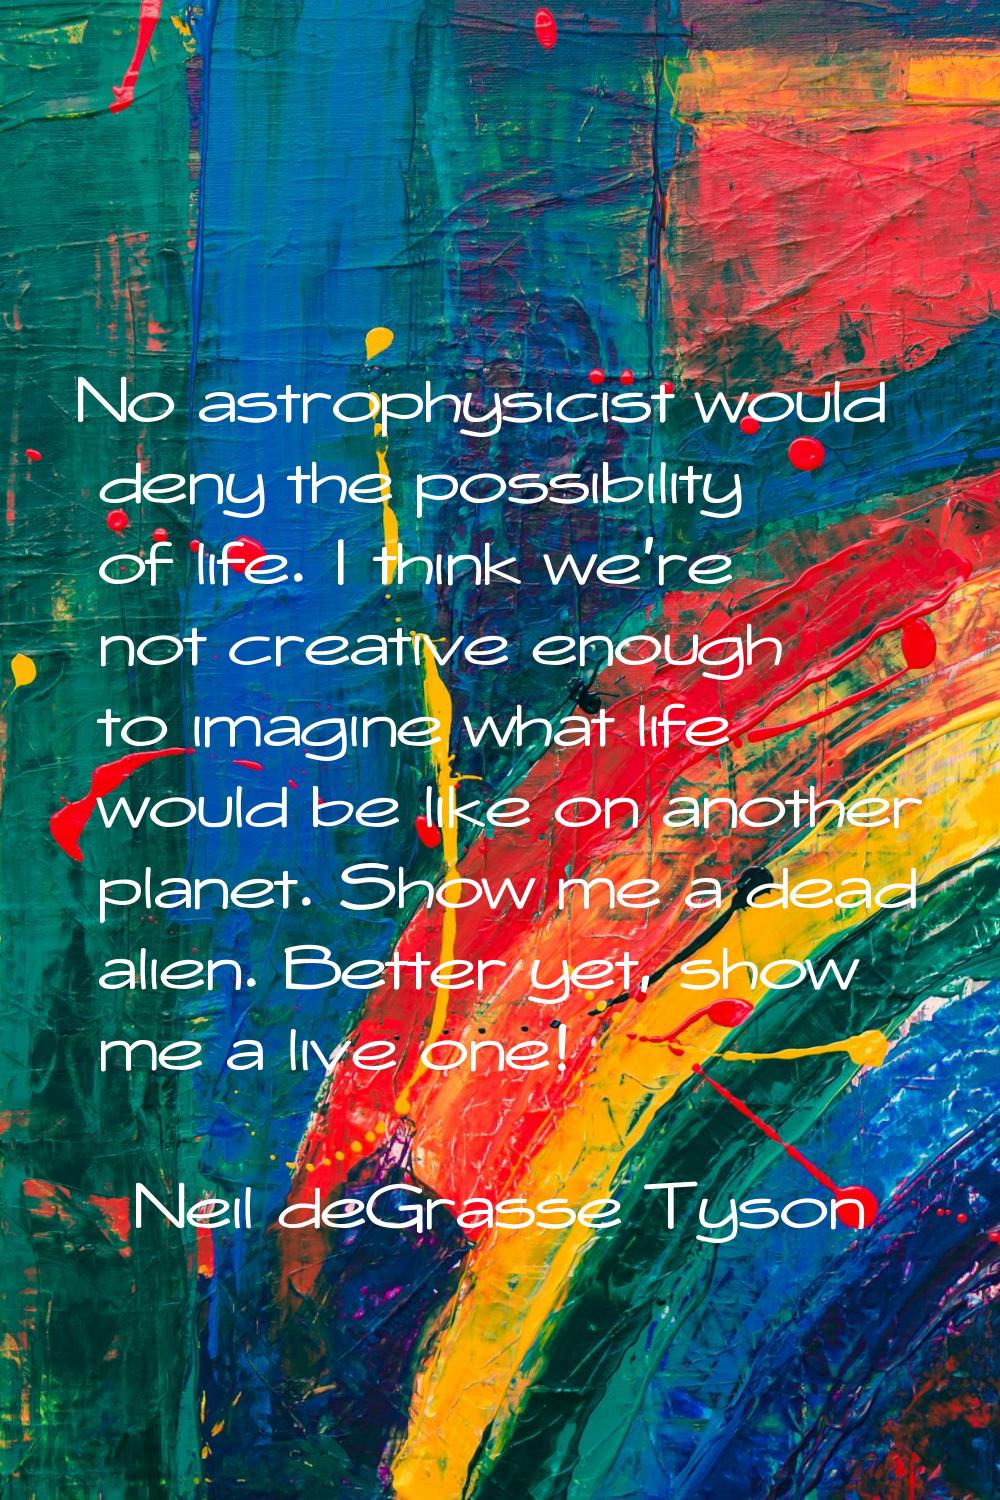 No astrophysicist would deny the possibility of life. I think we're not creative enough to imagine 